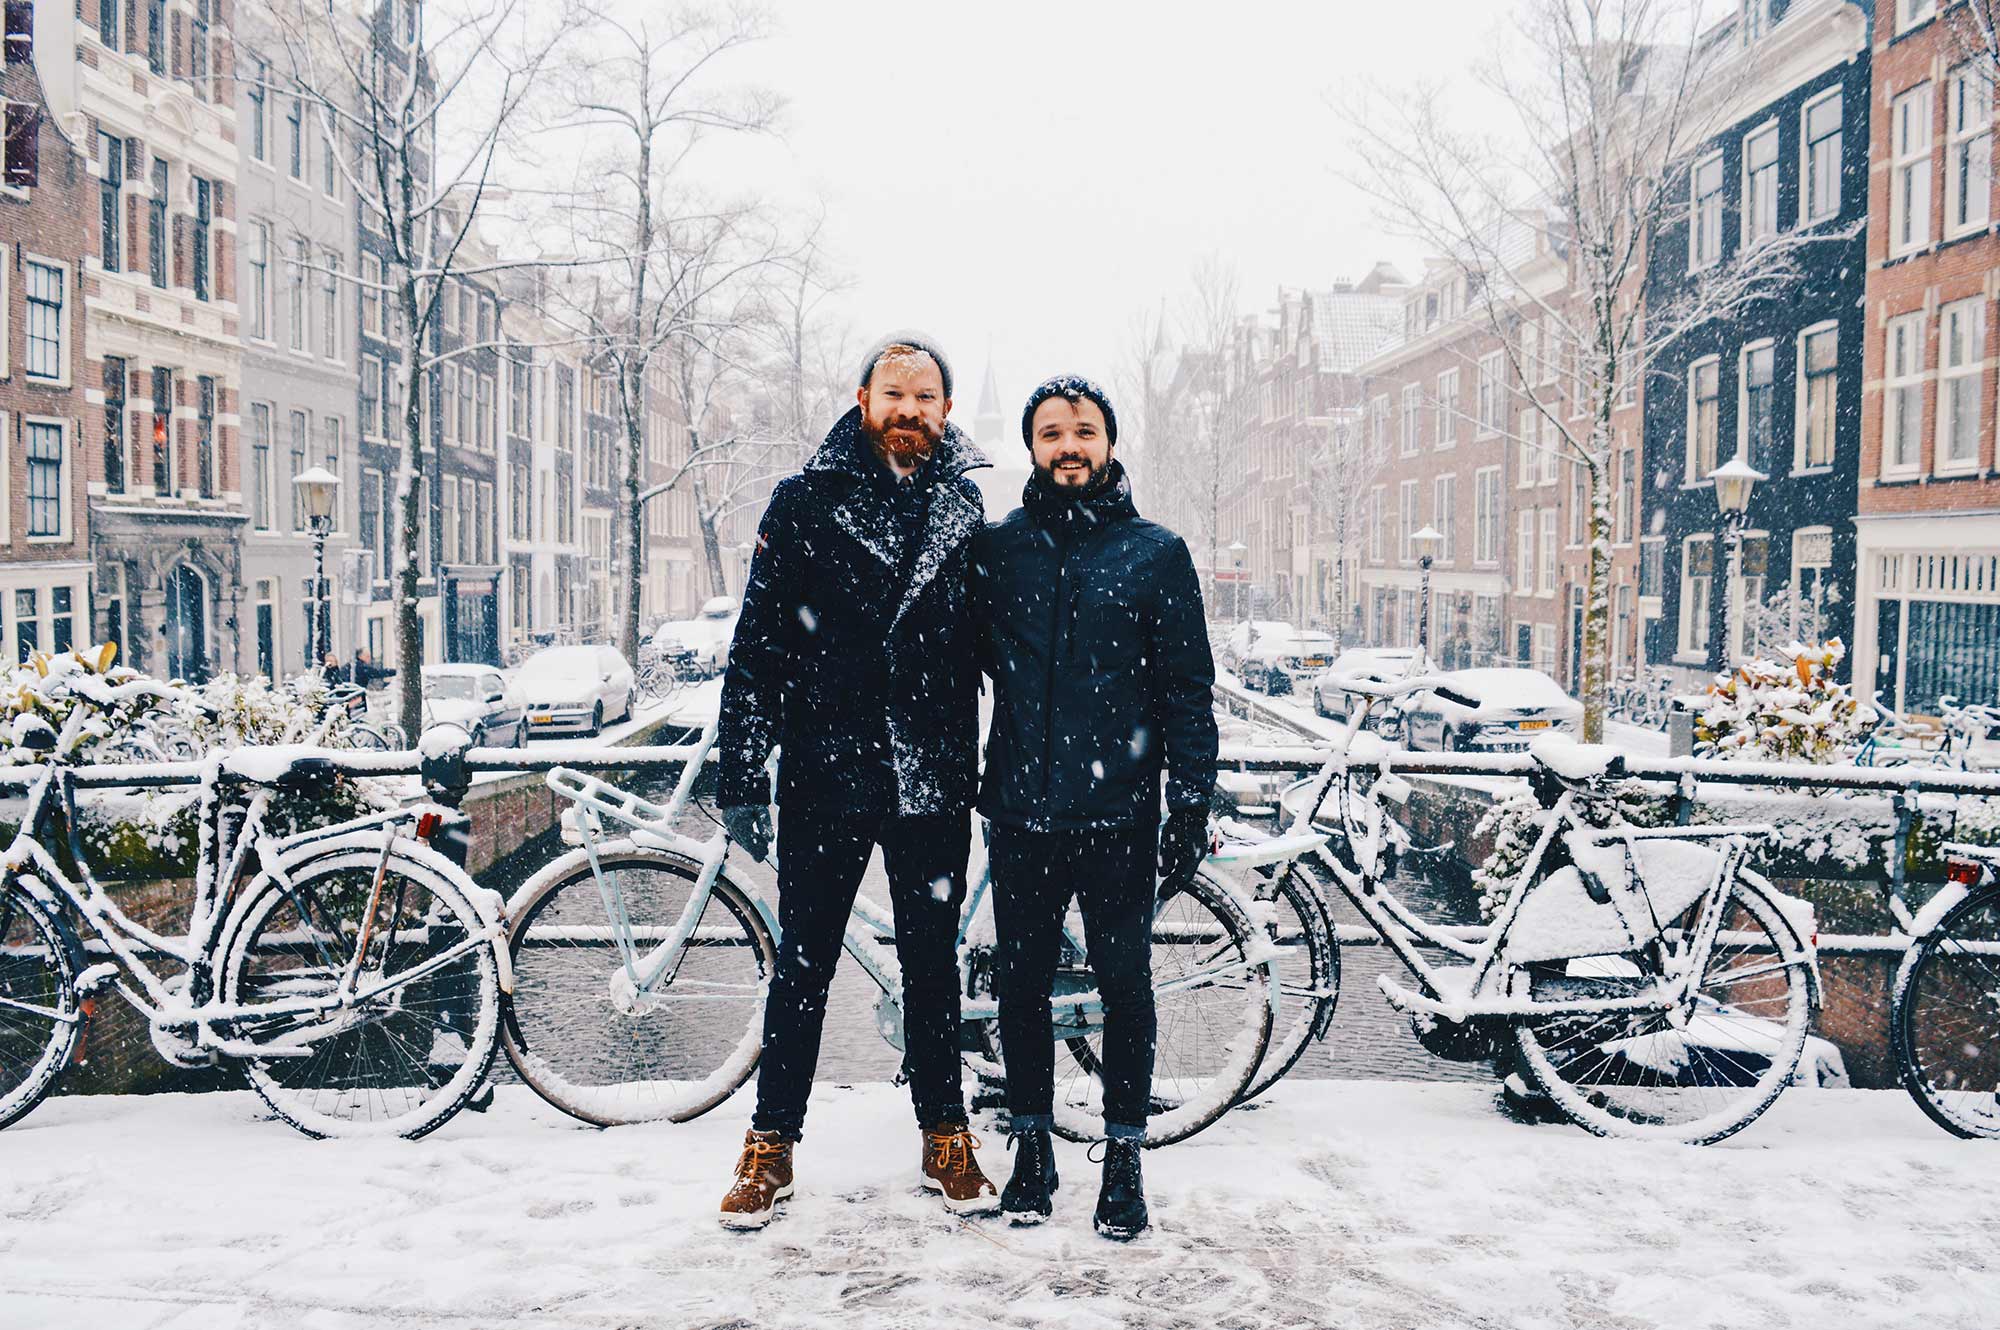 Snow in Amsterdam: A Winter Day in Holland’s Capital